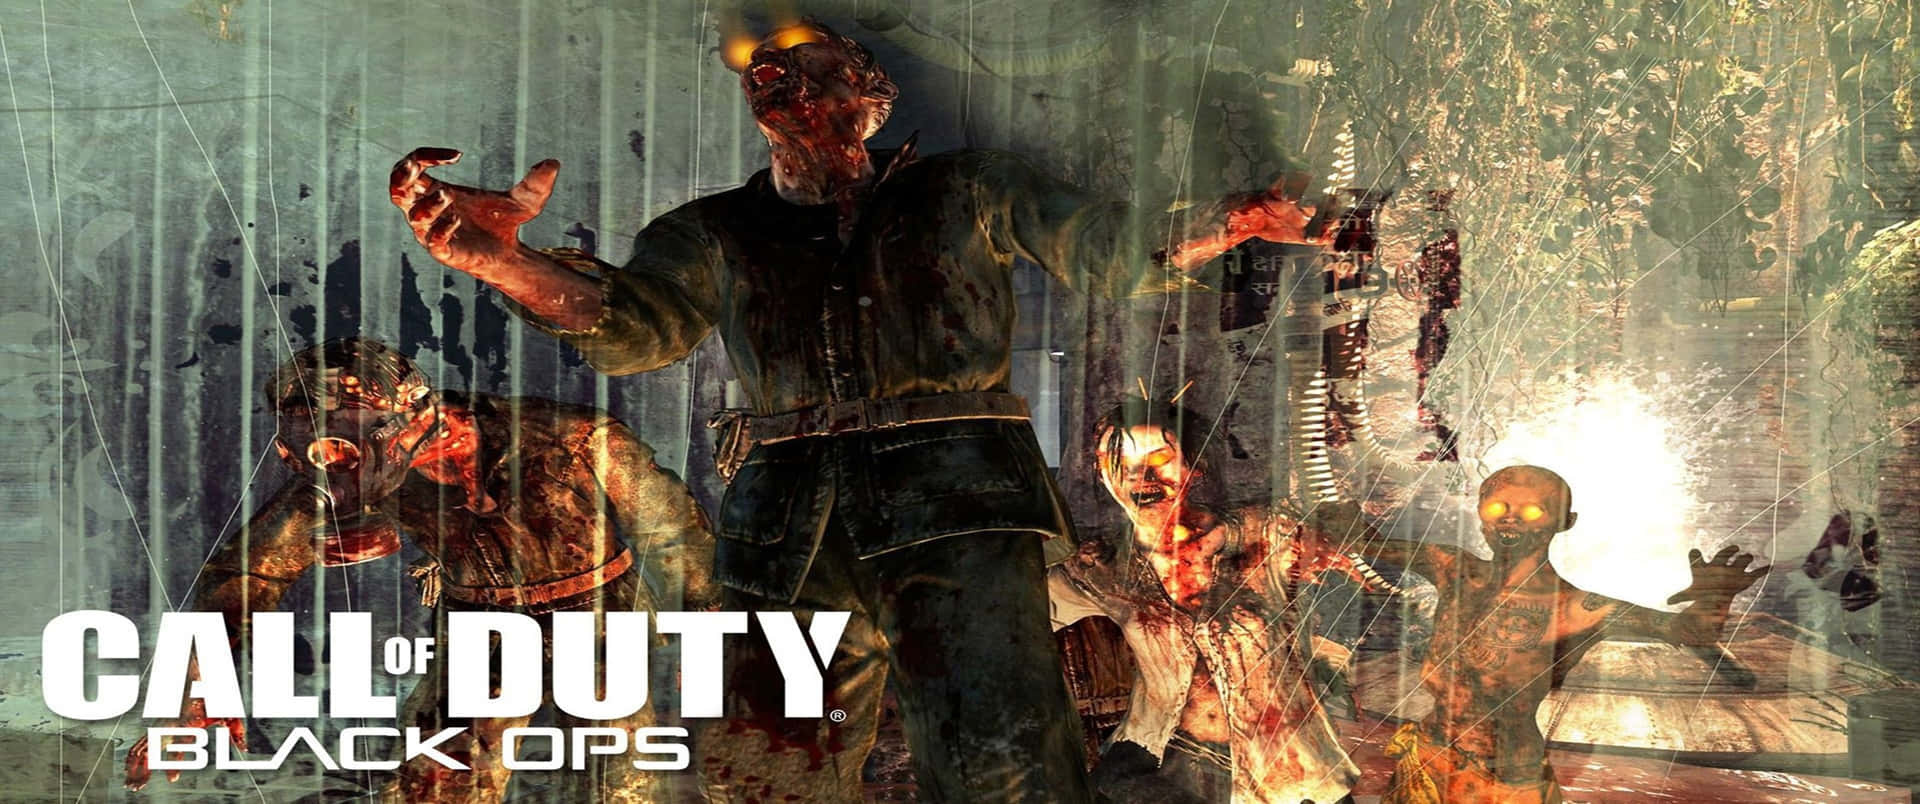 Sfondocall Of Duty Black Ops Cold War Zombies In Formato 3440x1440p